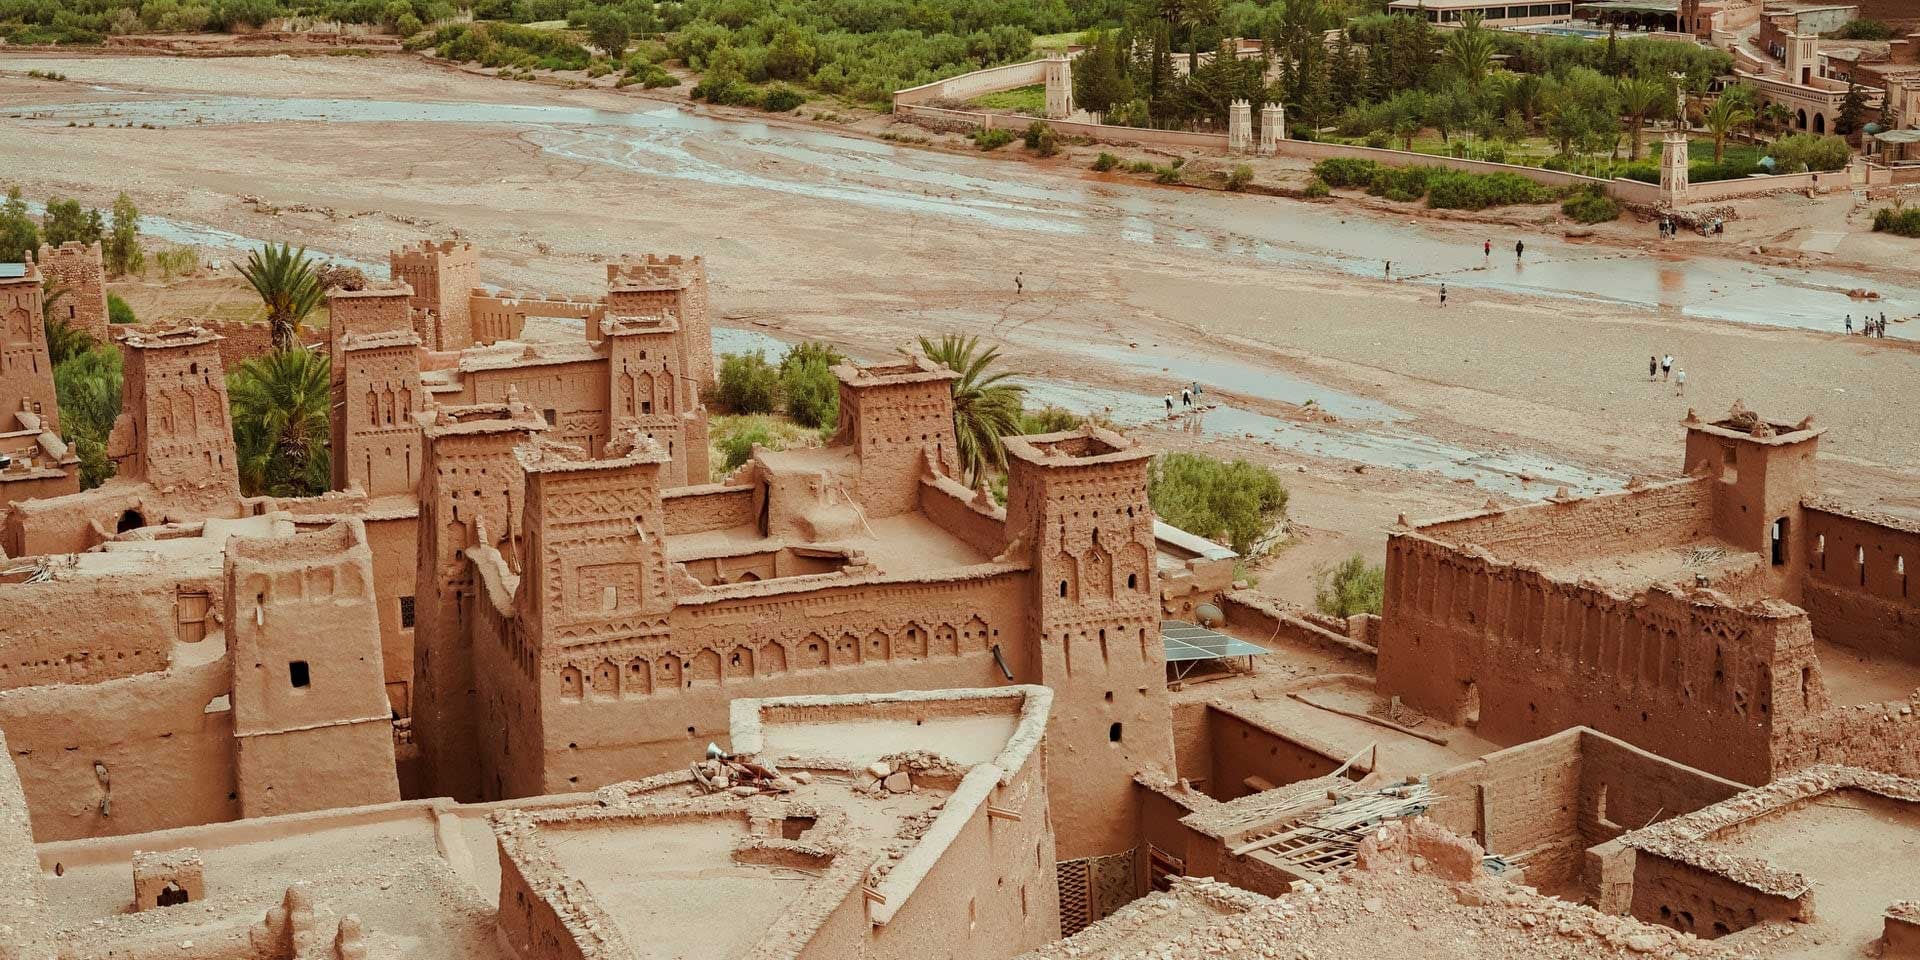 Tours and excursions in Morocco